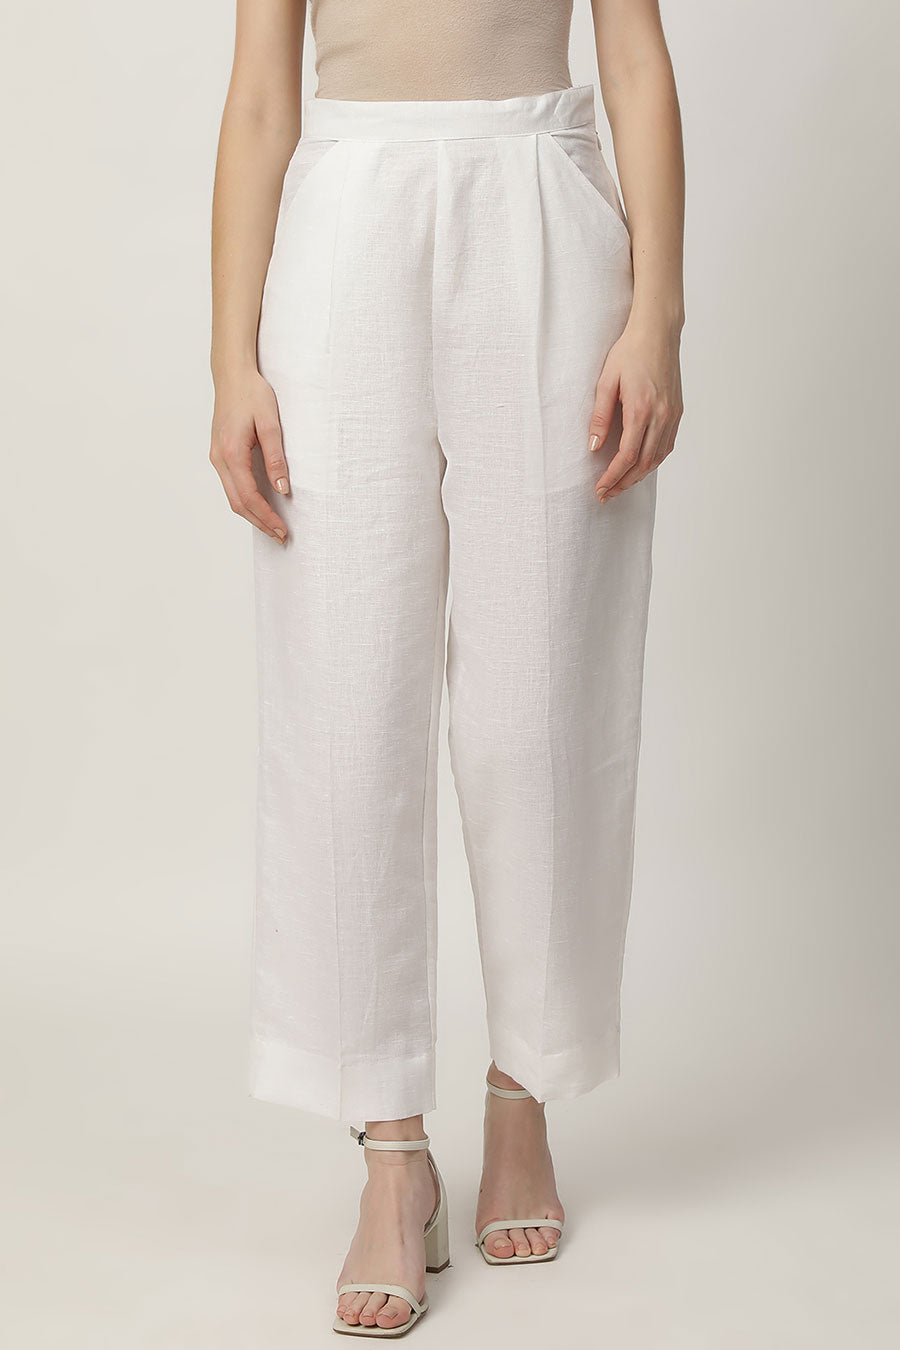 Fifi Straight Fit Pants